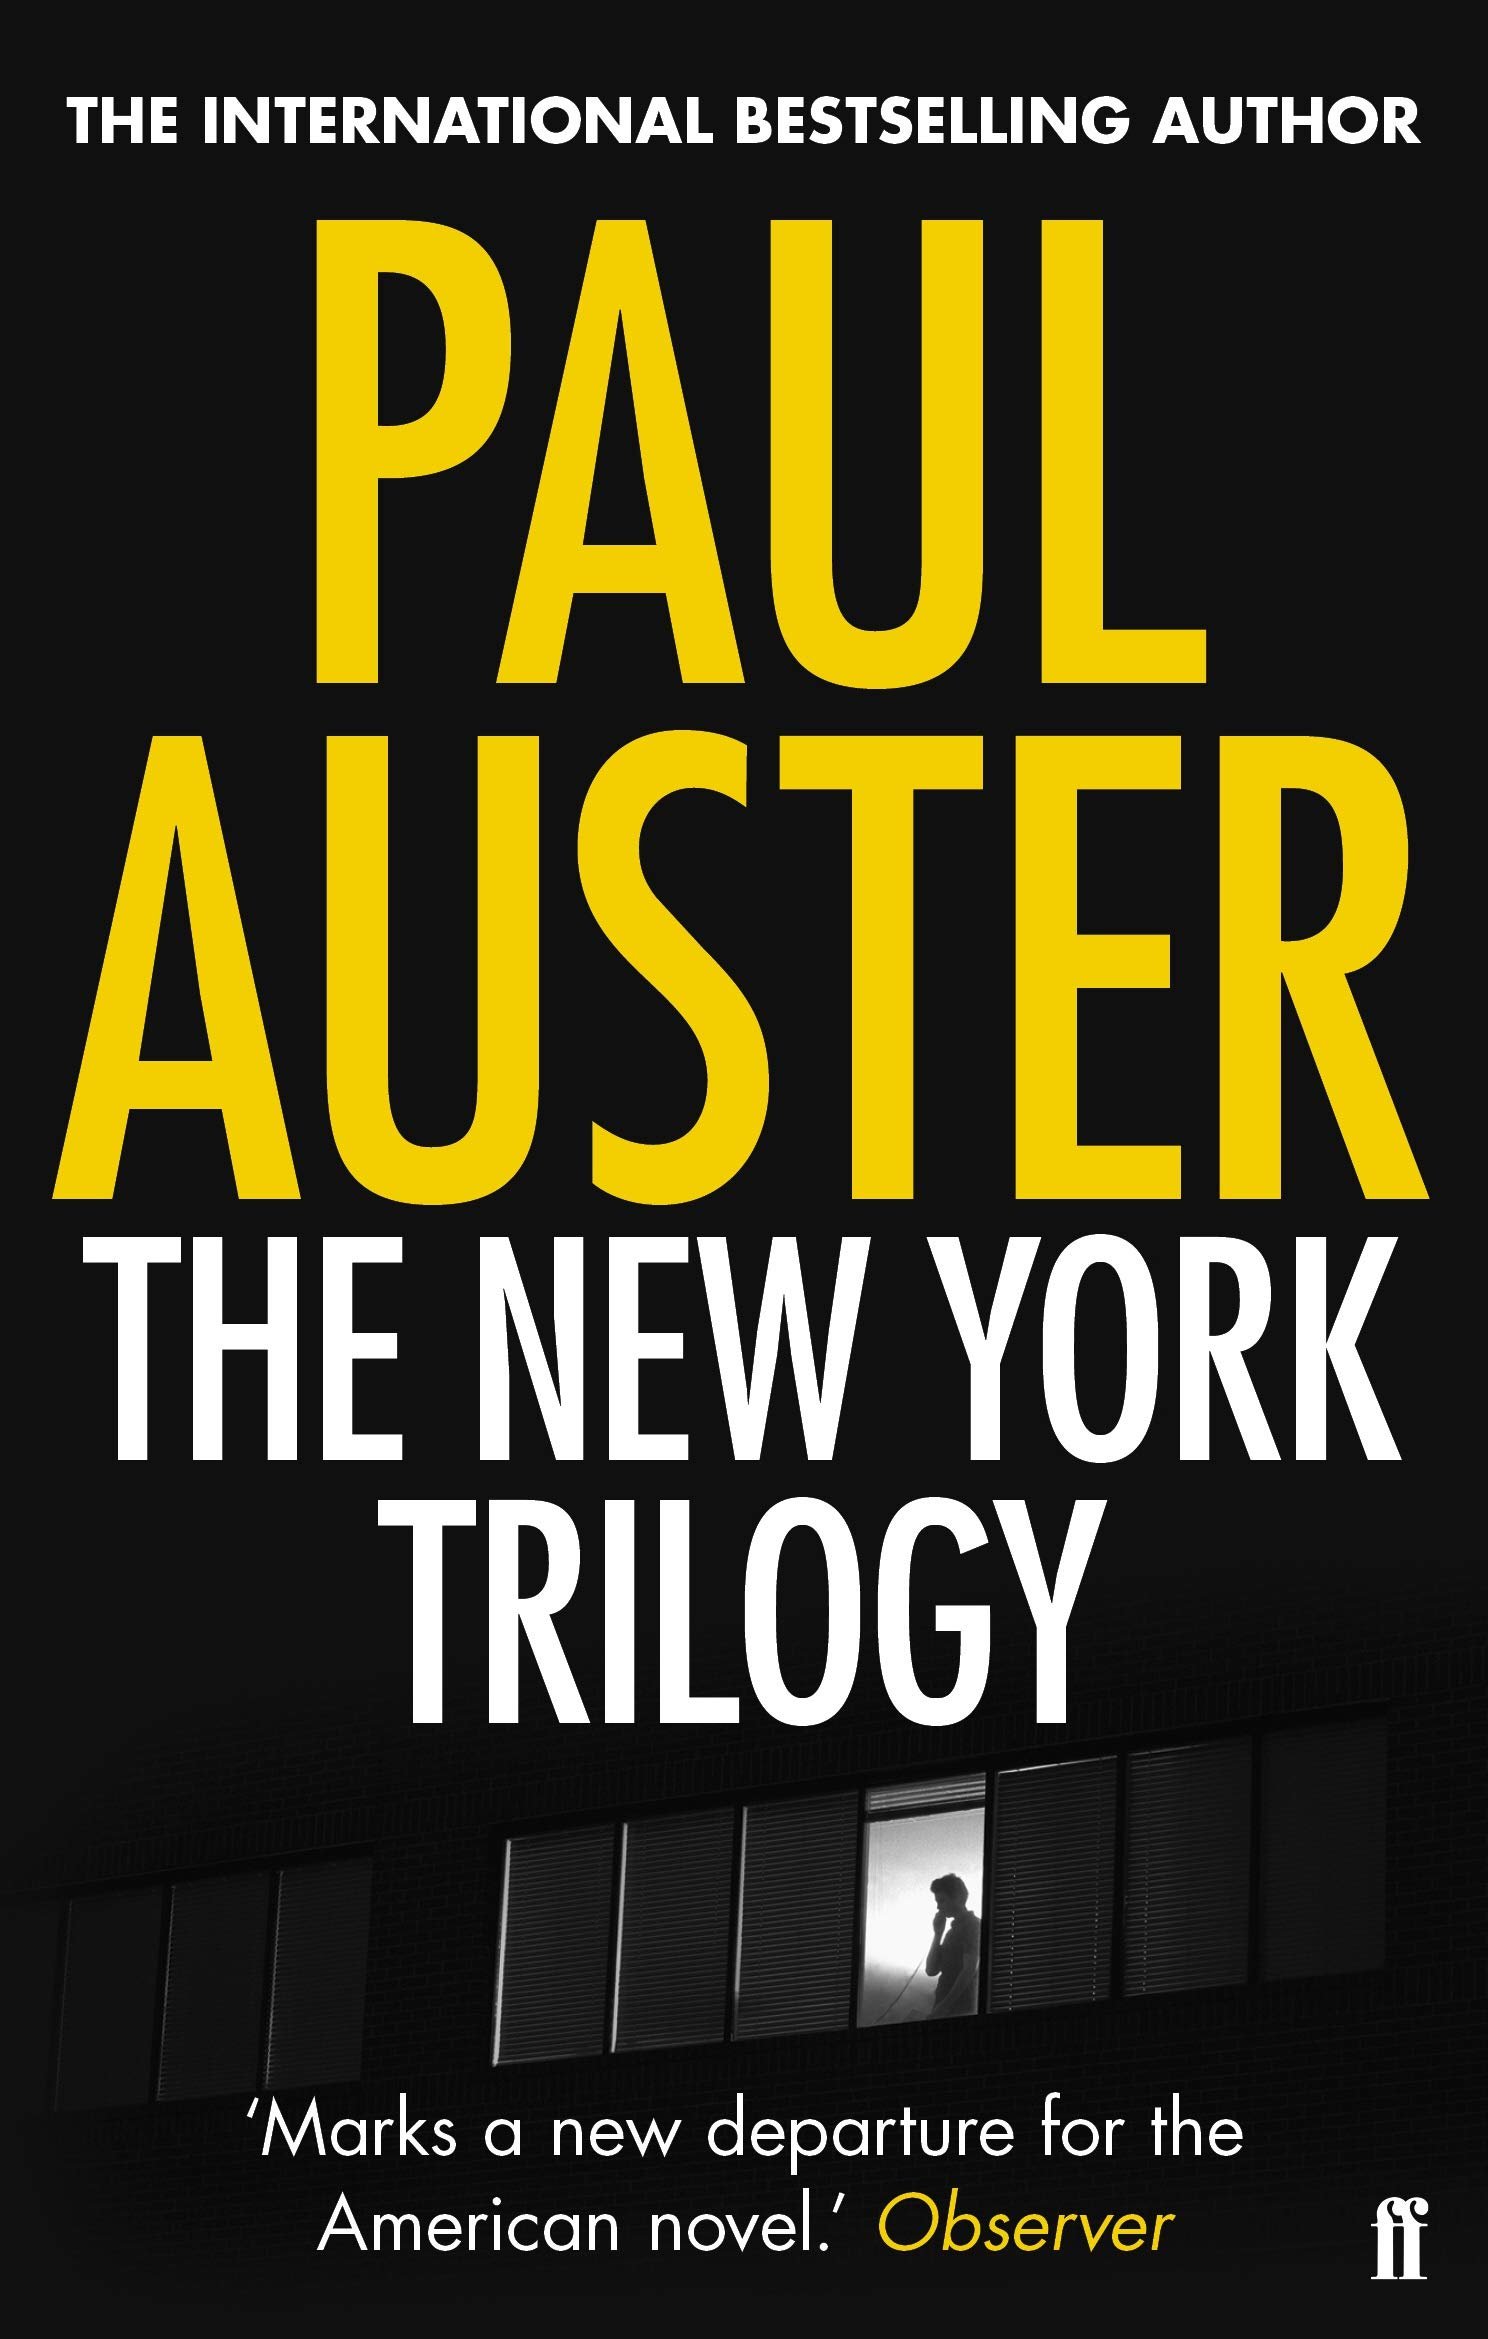 The New York Trilogy - Tuesdays from 25th June